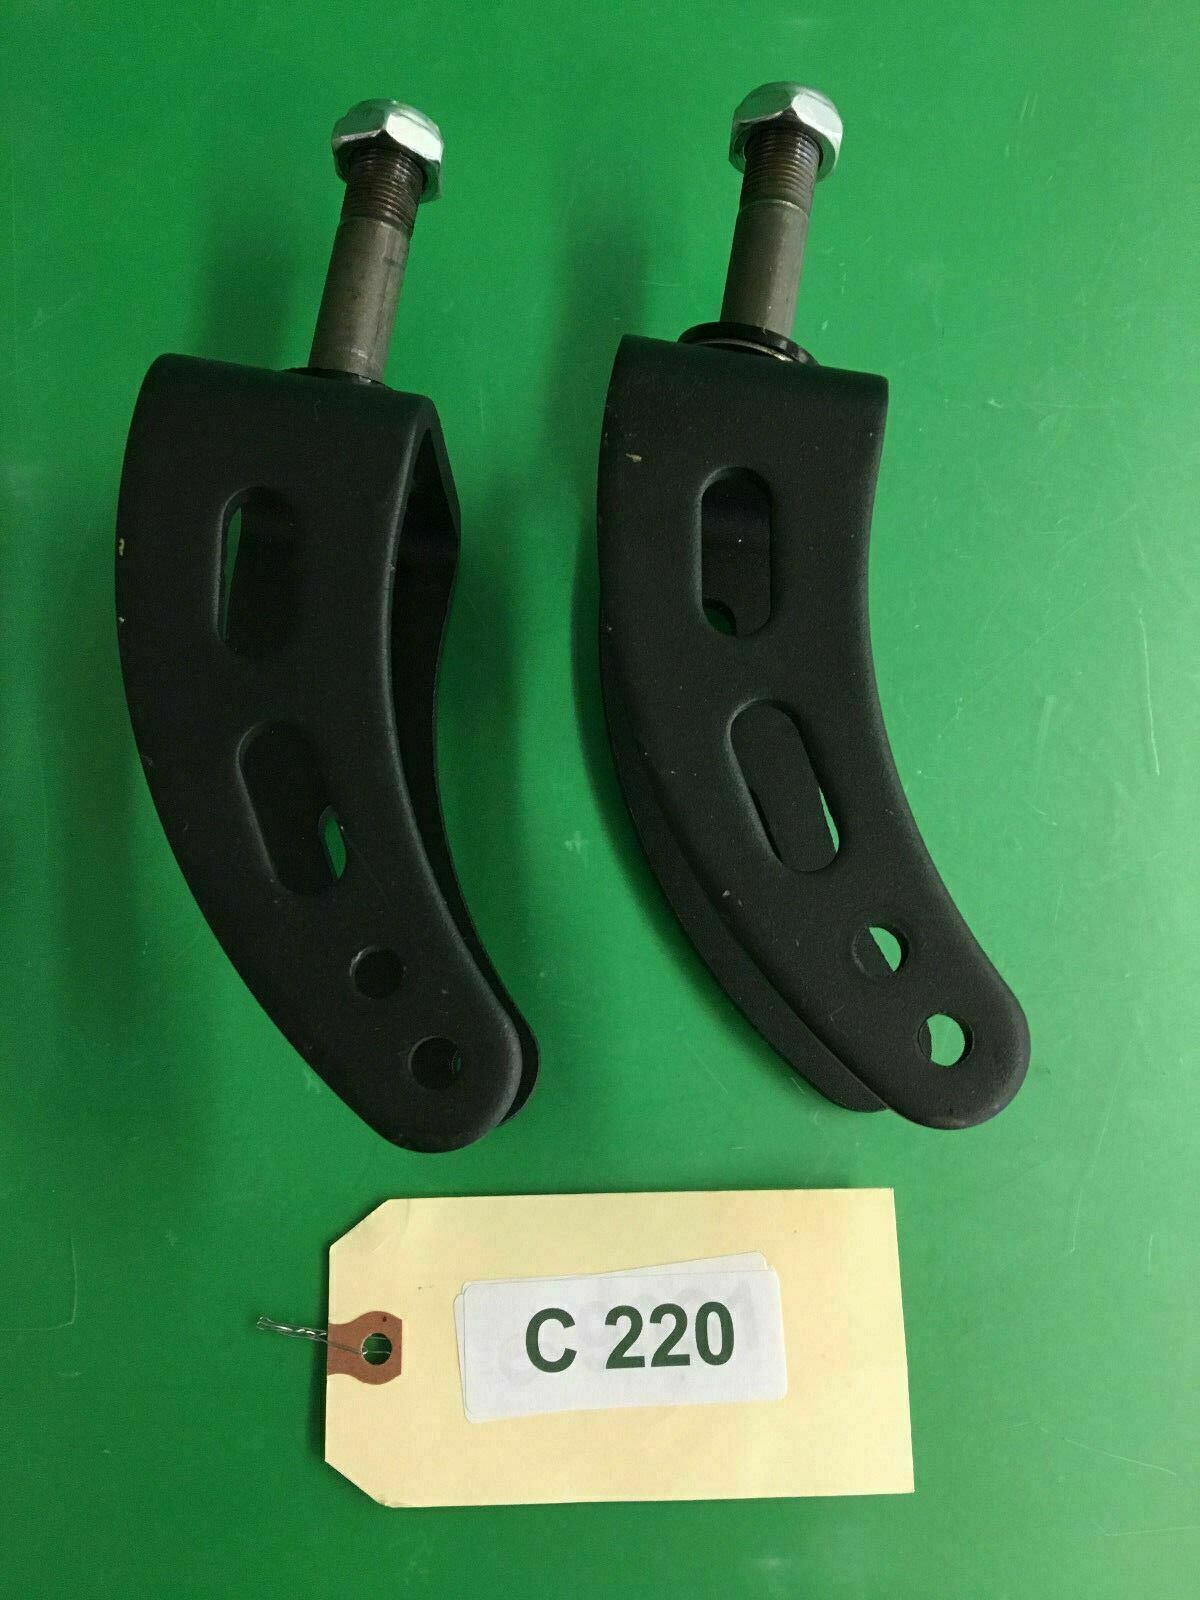 Rear Caster Forks for Hoveround MPV5 Power Wheelchair #C220